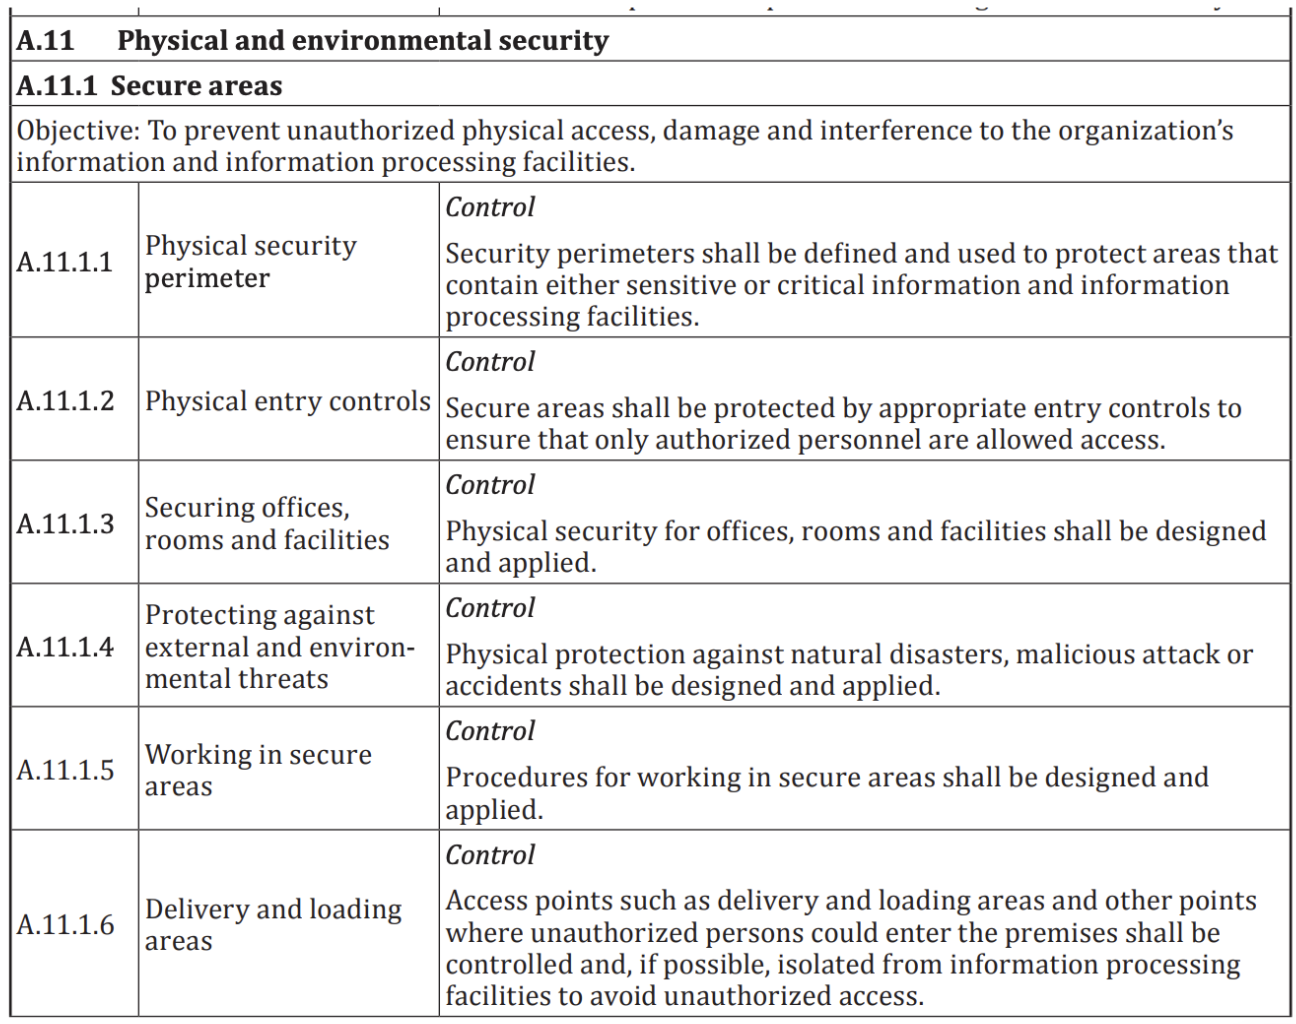 ISO standard - physical and environmental security